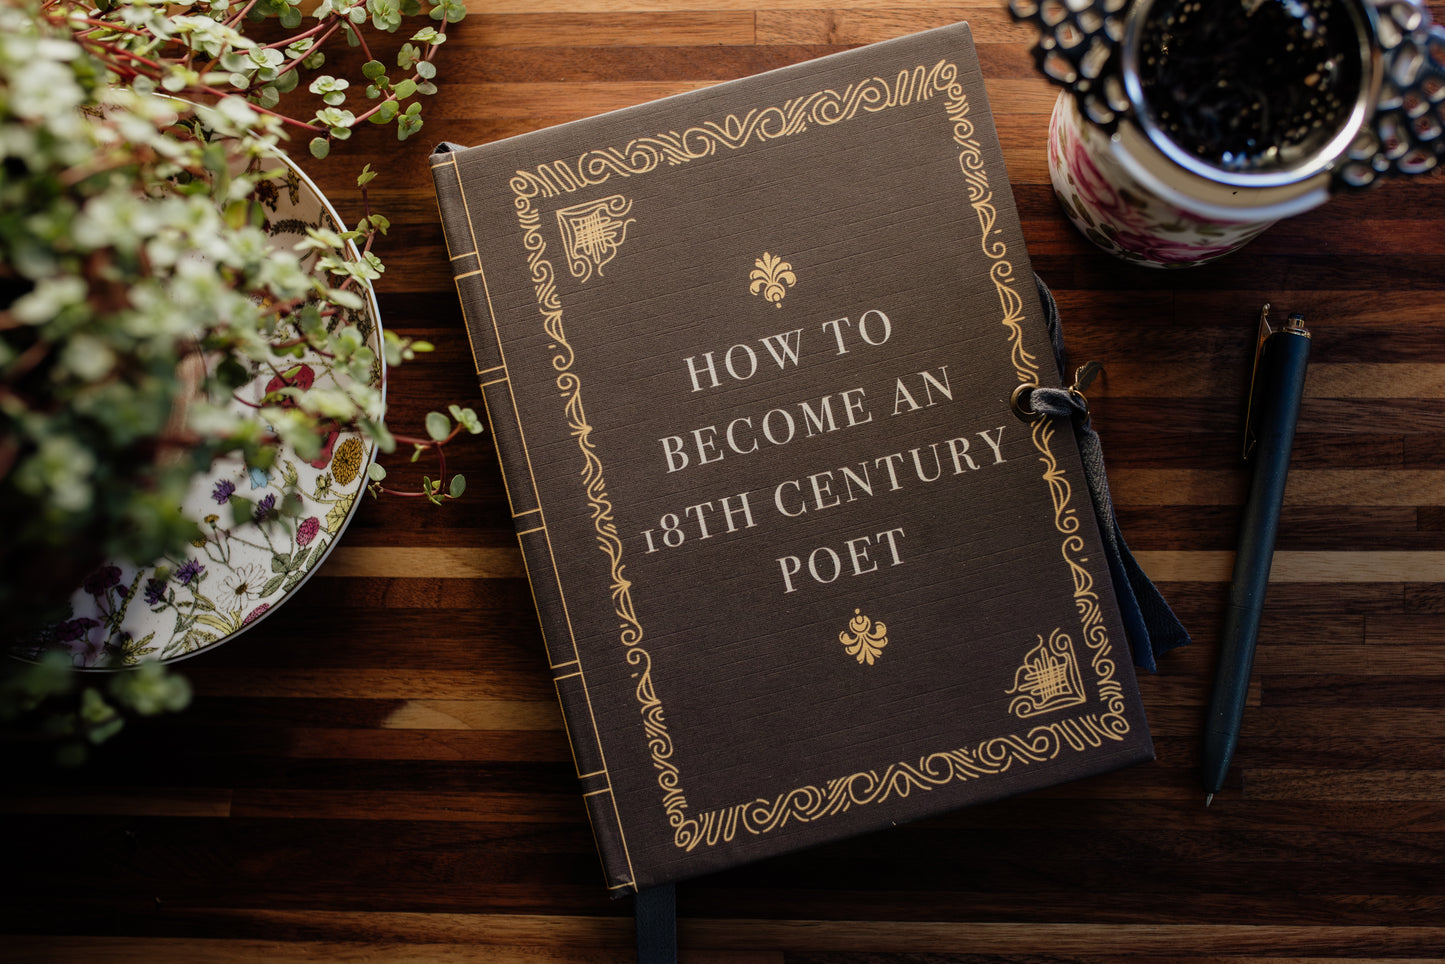 How To Become An 18th Century Poet: Hardcover Journal